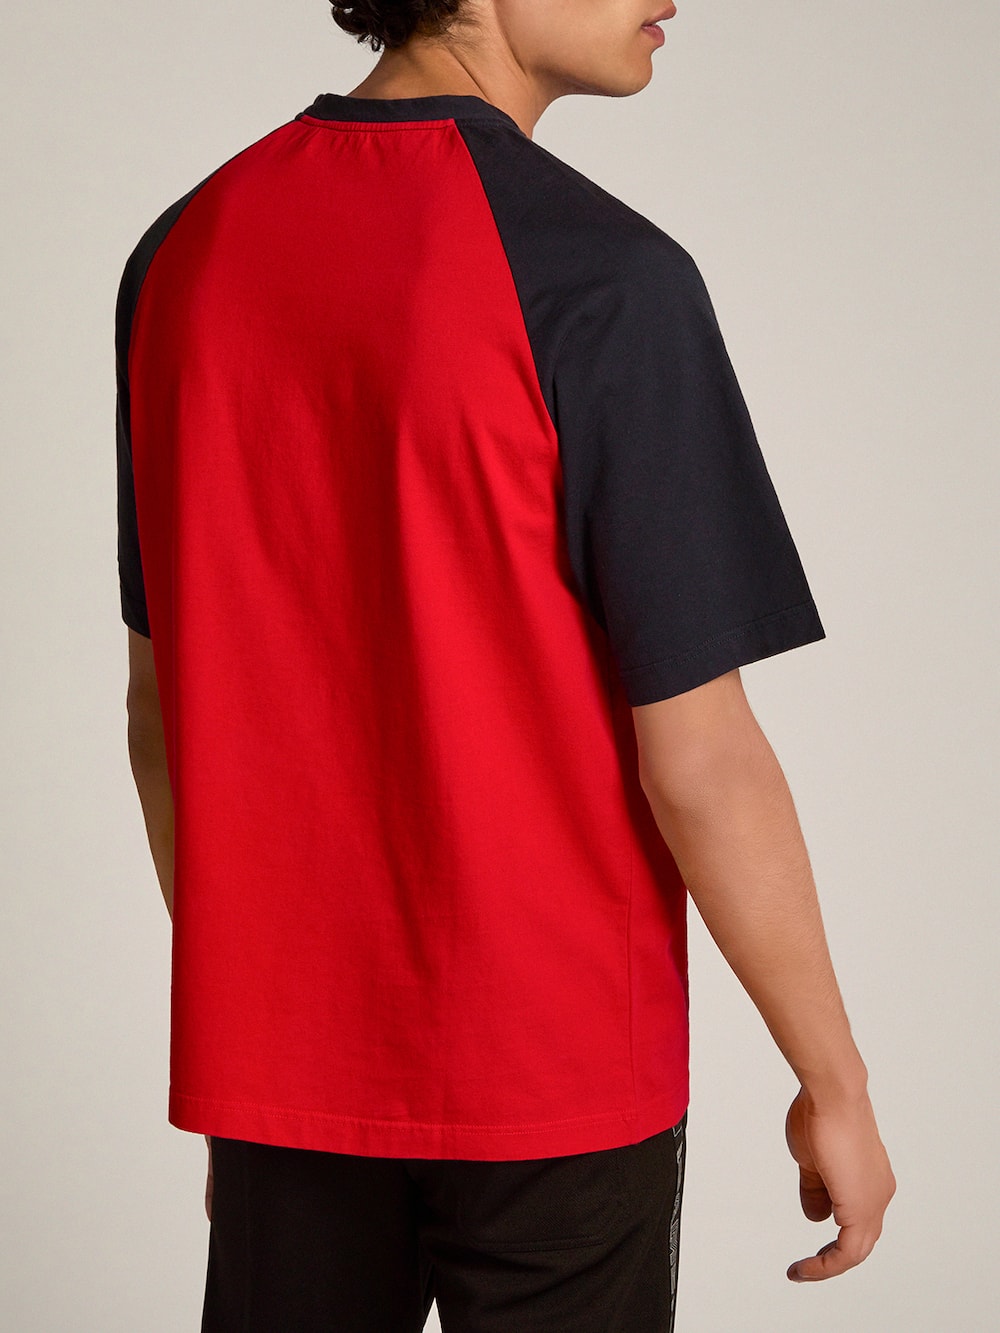 Golden Goose - Red T-shirt Game EDT Capsule Collection with contrasting logo in 